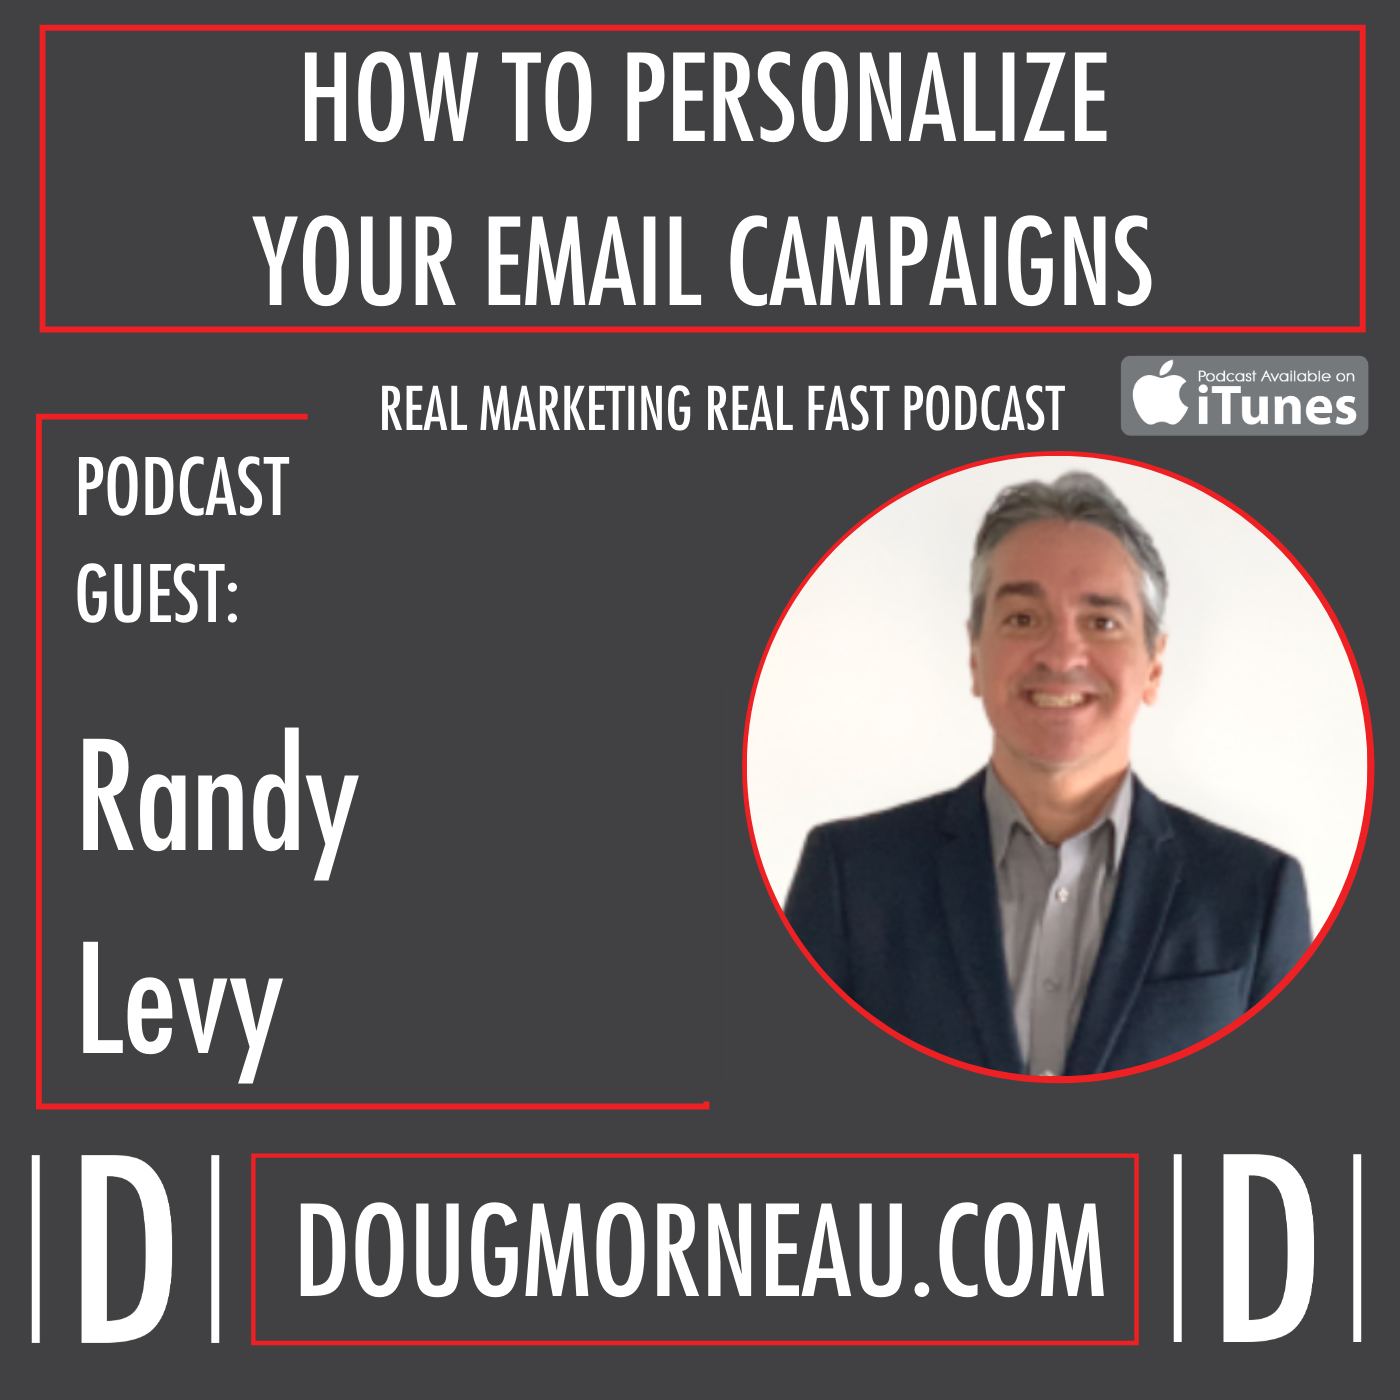 RANDY LEVY - HOW TO PERSONALIZE YOUR EMAIL CAMPAIGNS - HOW TO IMPROVE YOUR GOOGLE RANKS IN 2020 - DOUG MORNEAU - REAL MARKETING REAL FAST PODCAST